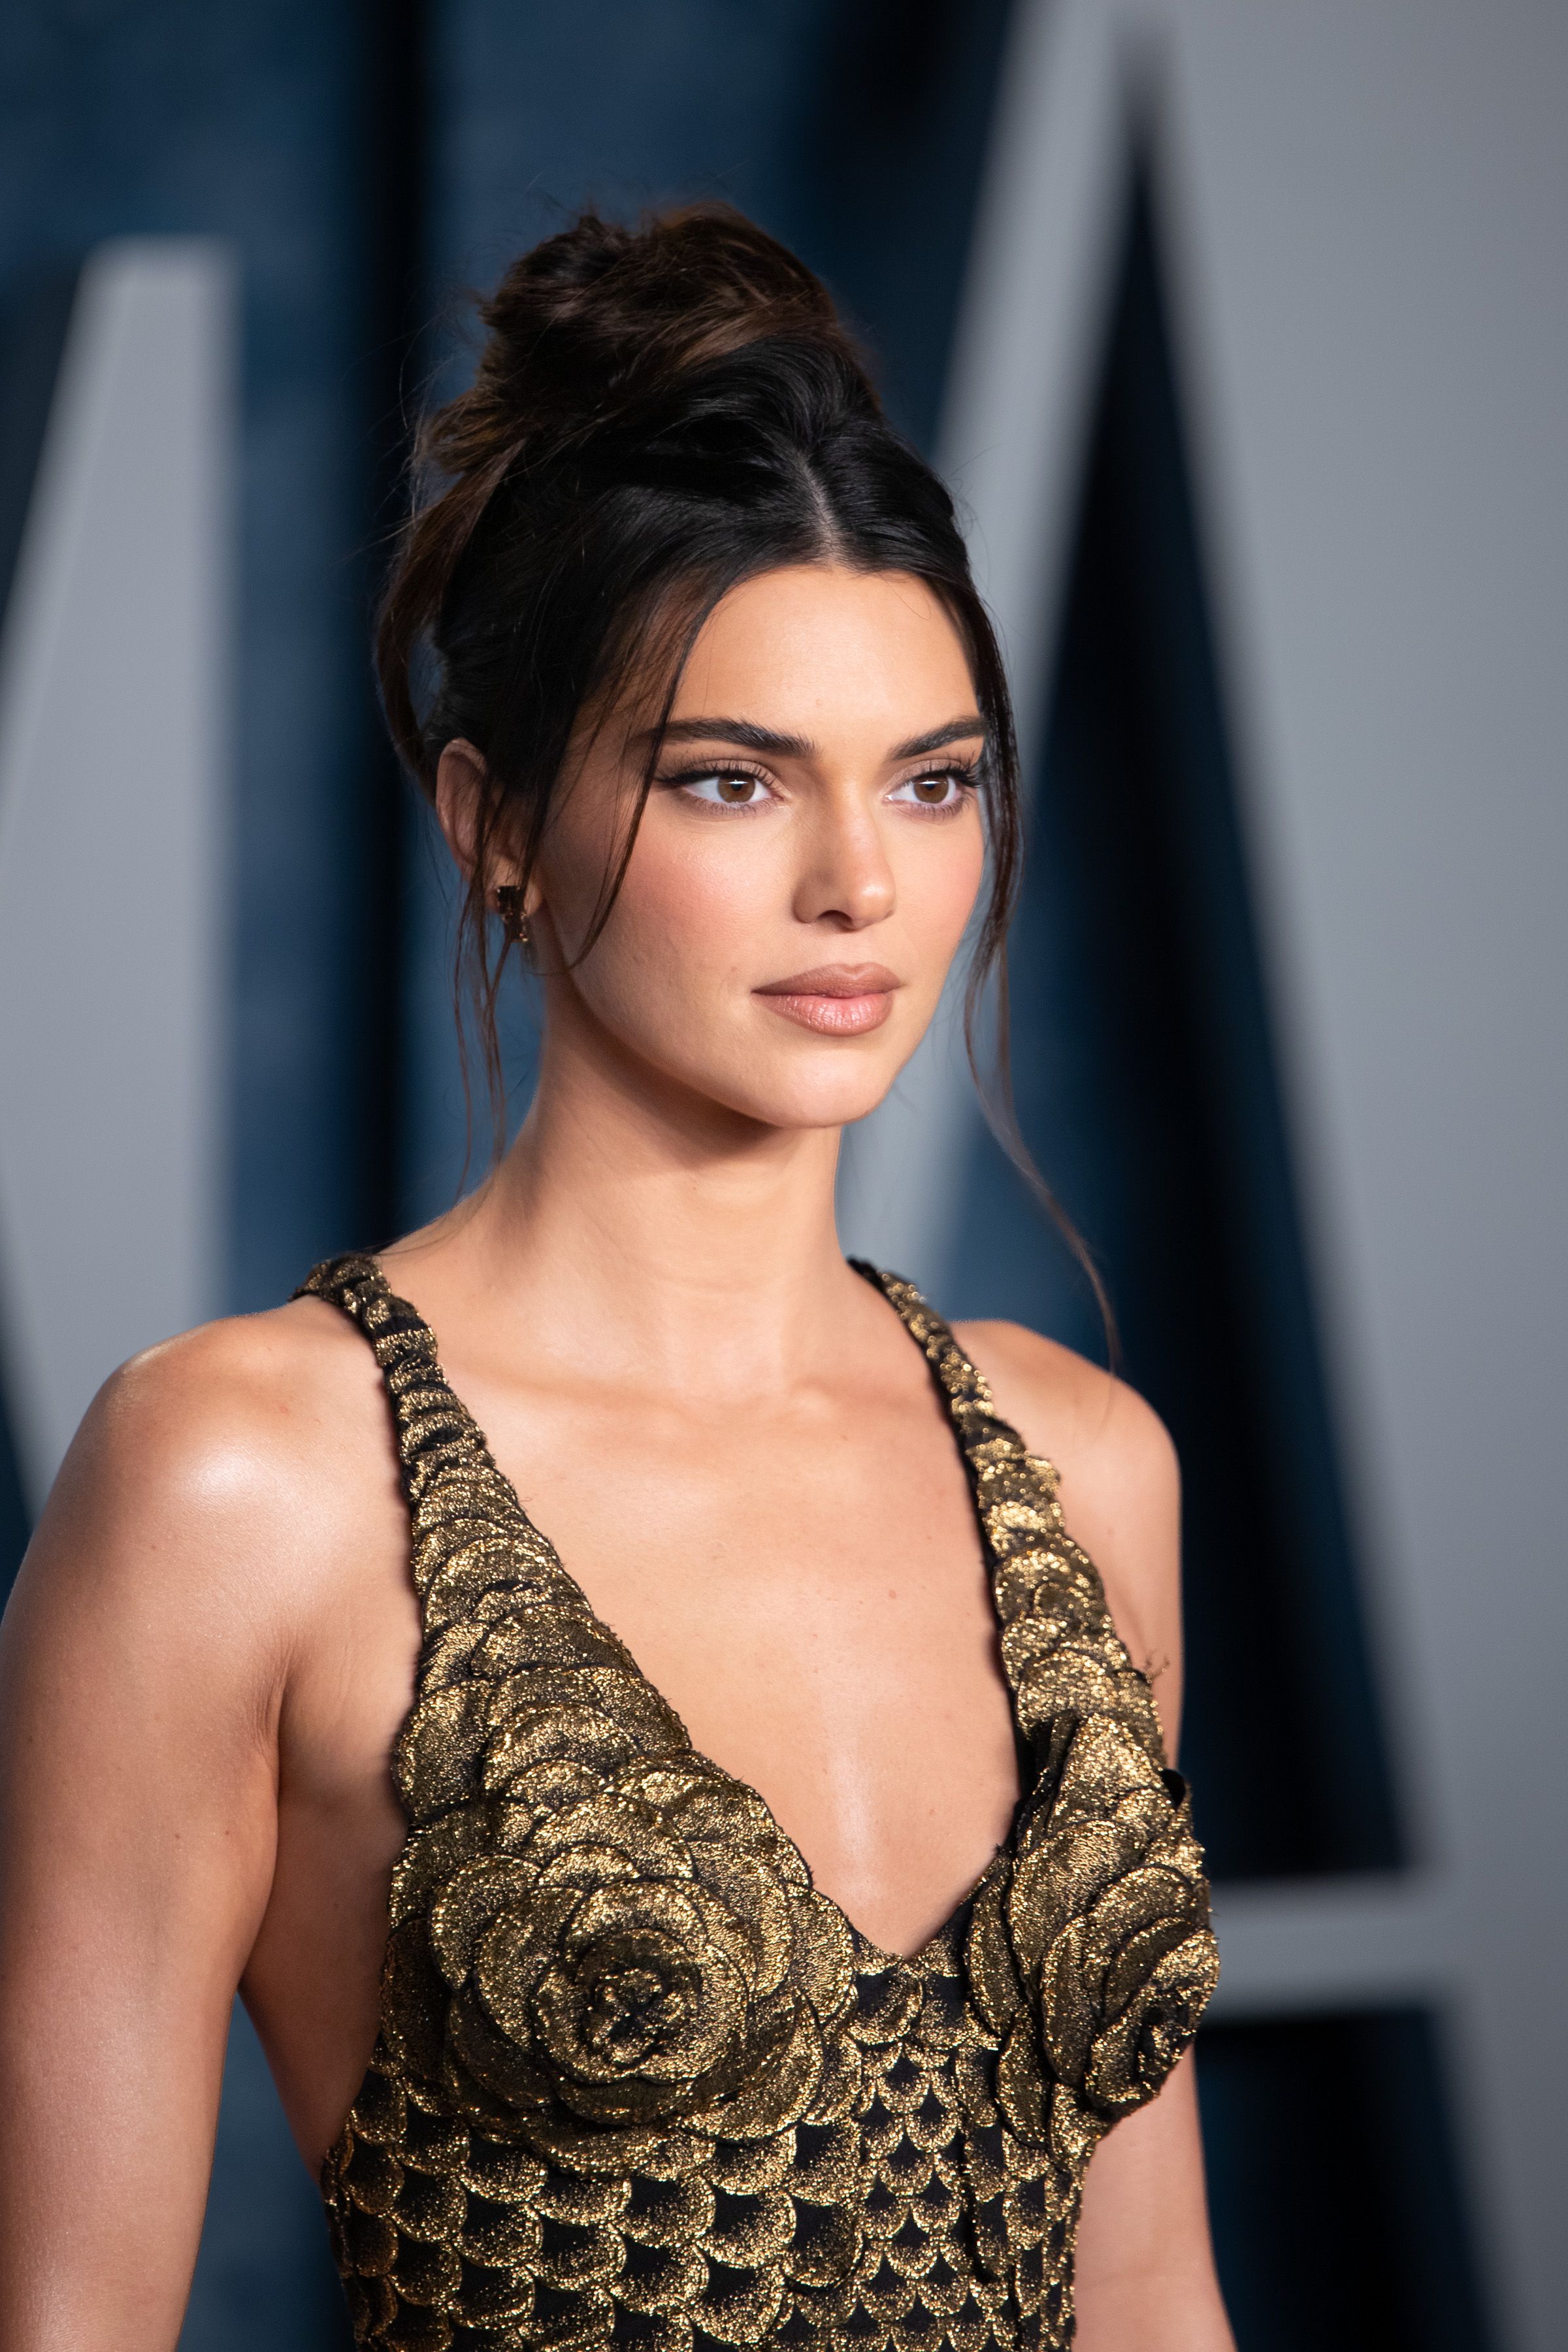 Kendall Jenner Makeup Is Trending On TikTok, And It's All About